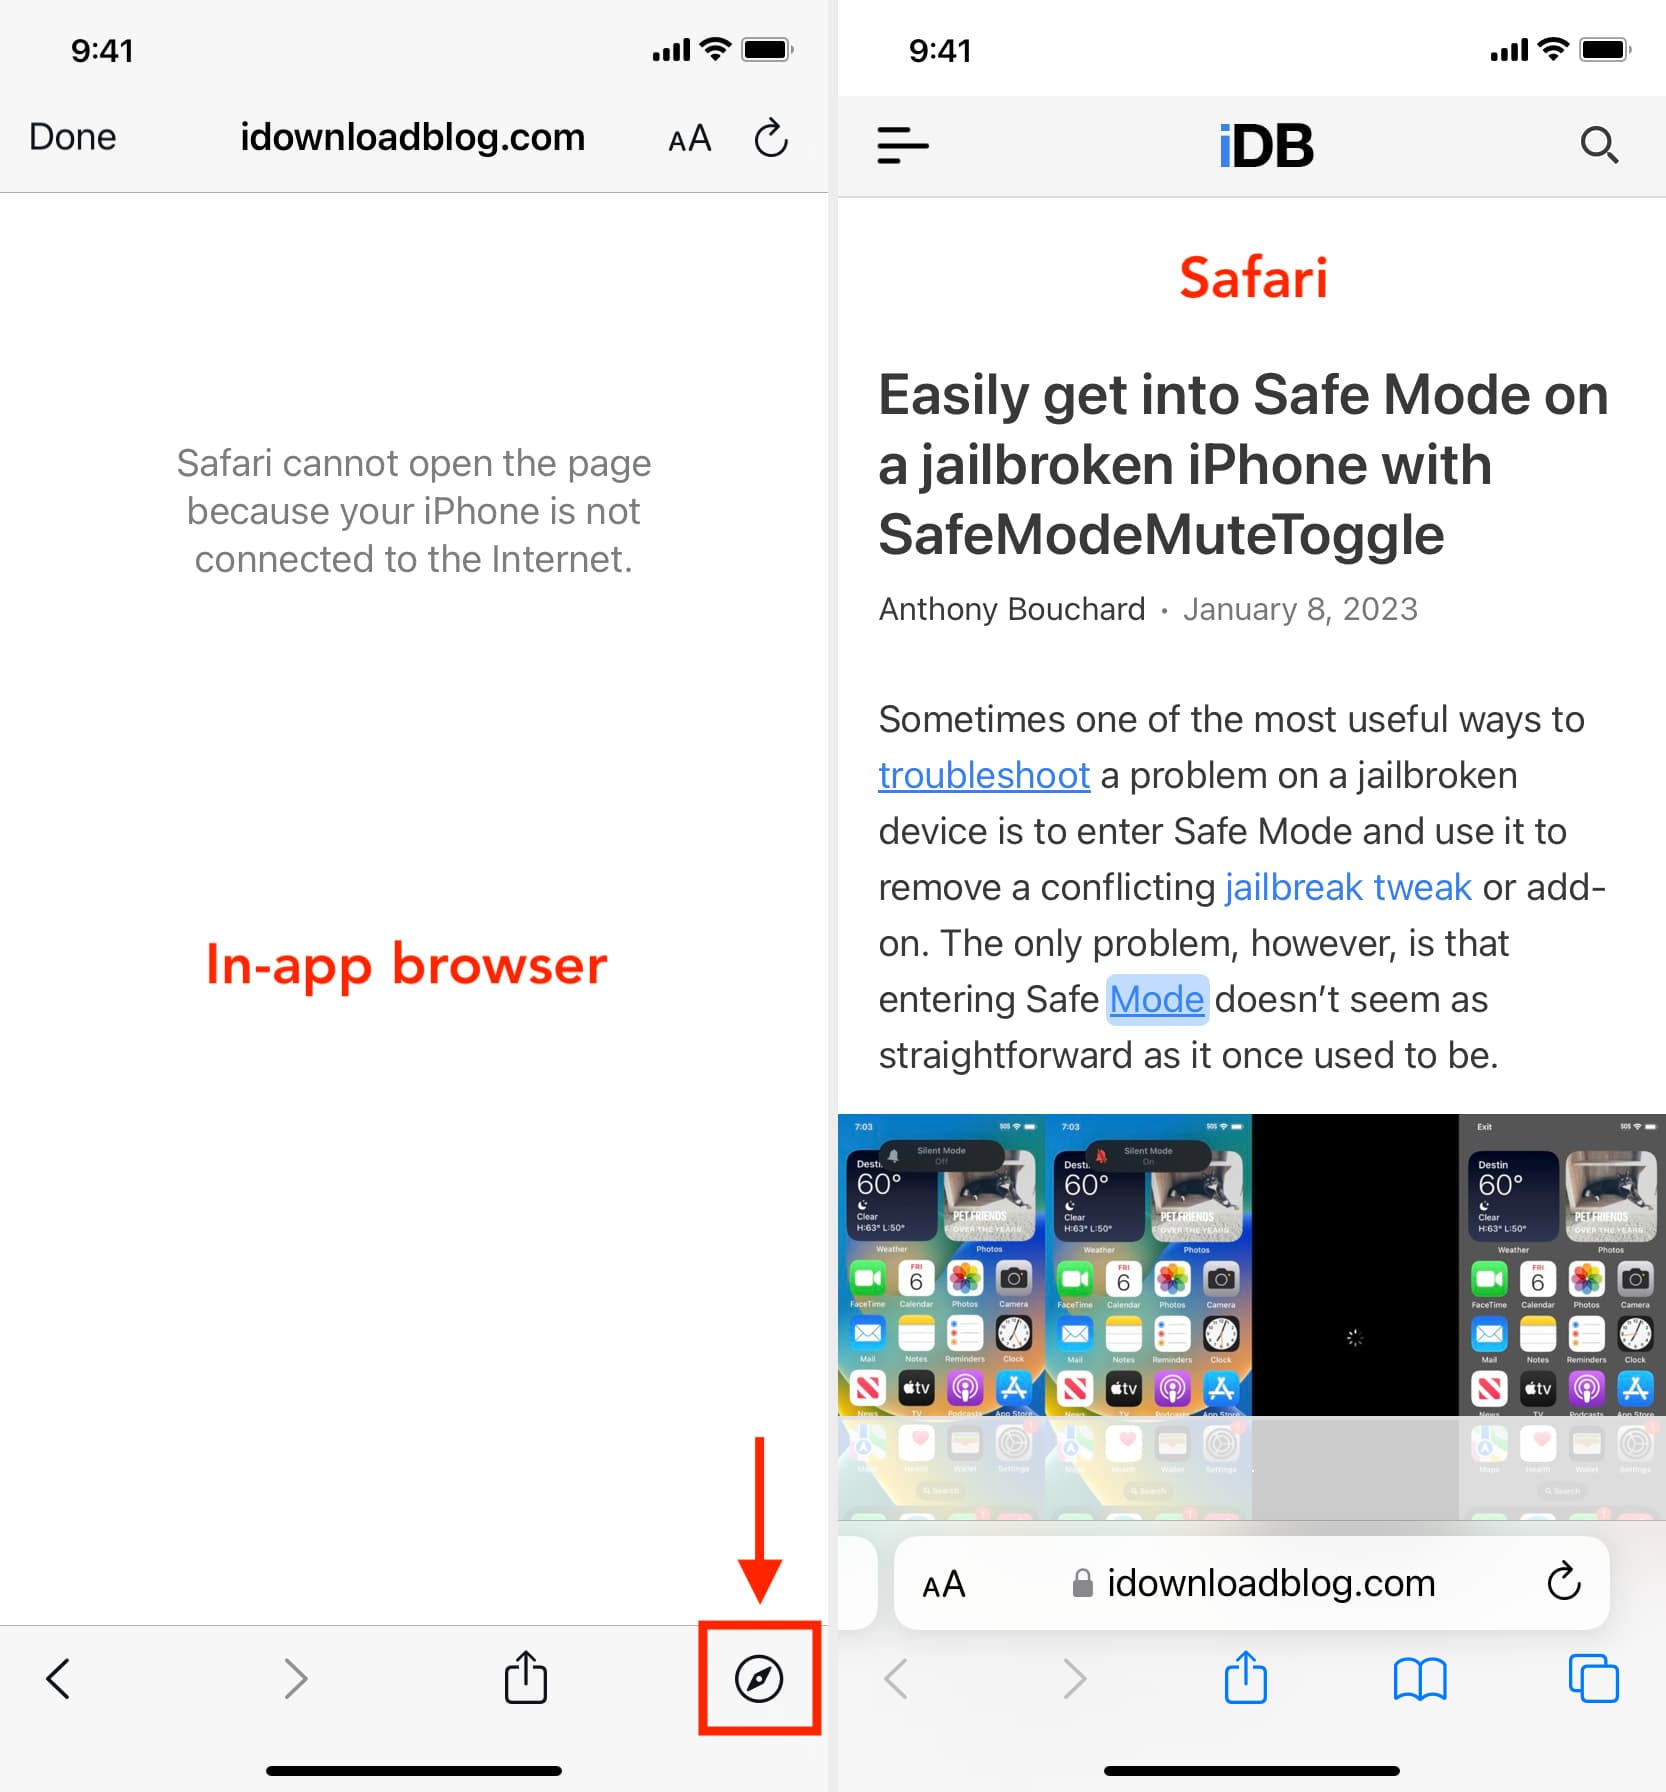 Use Safari instead of the in-app browser